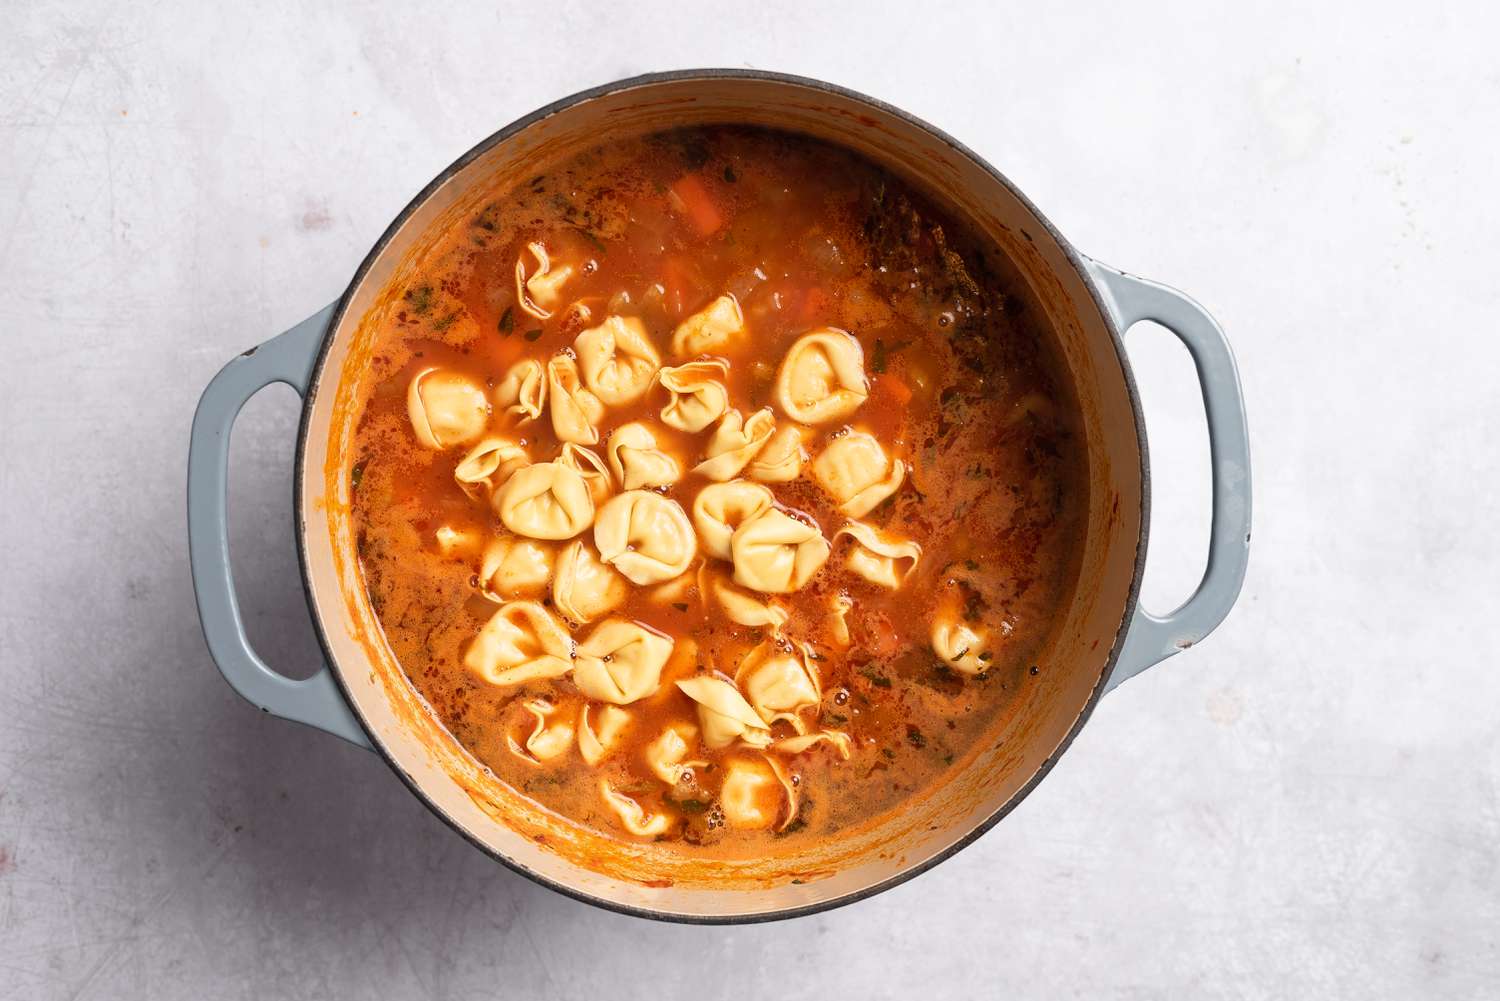 Tortellini added to the pot of vegetable soup